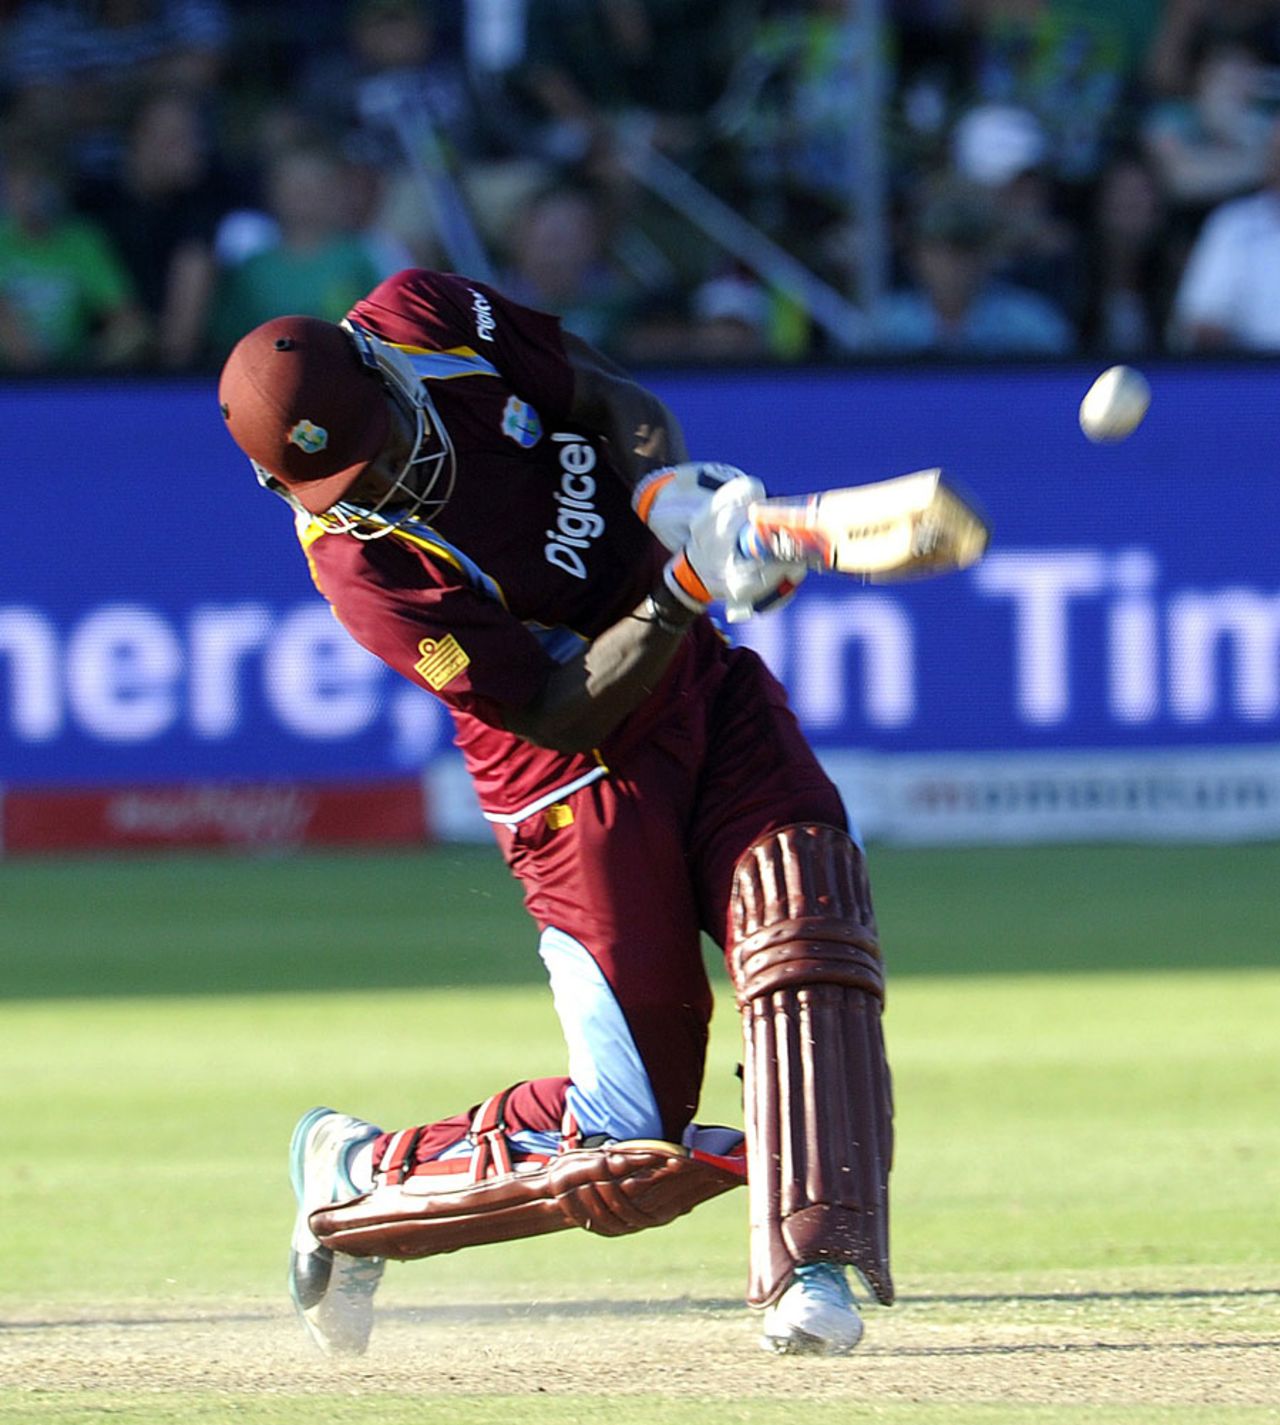 Andre Russell cuts loose, South Africa v West Indies, 4th ODI, Port Elizabeth, January 25, 2015